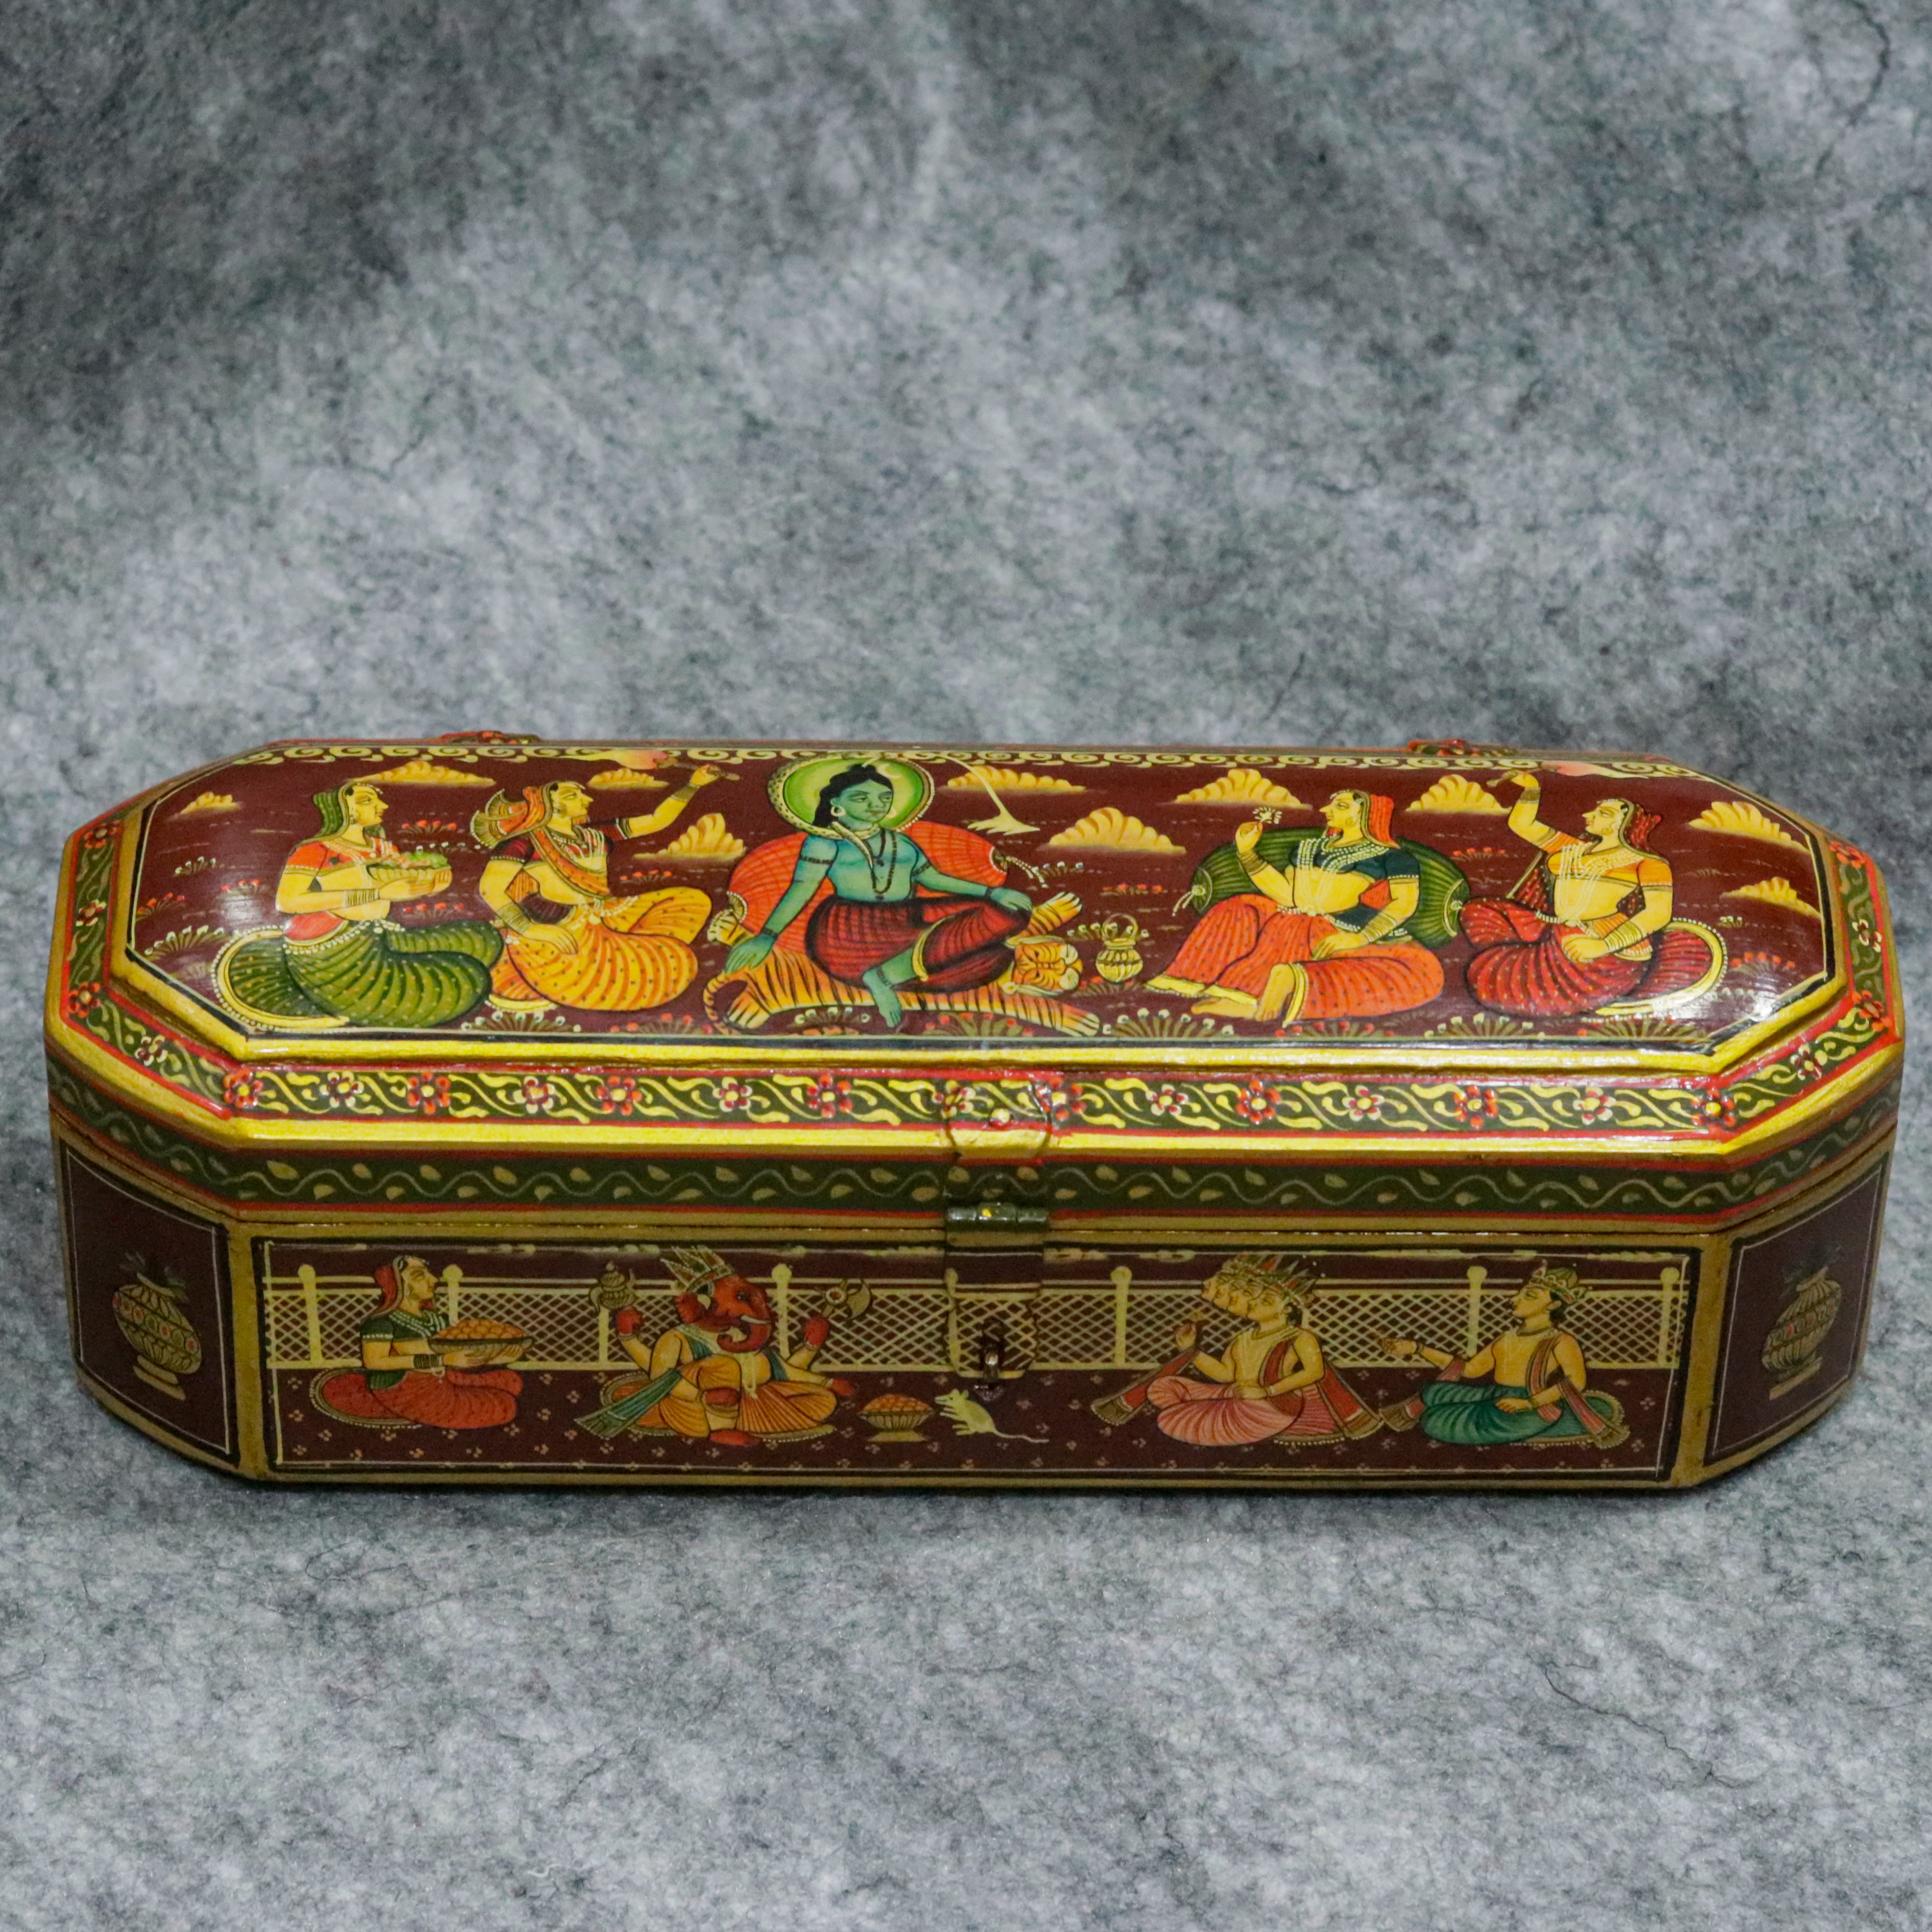 Hand Painted Indian Art jeweler box with multiple slots Wooden Box